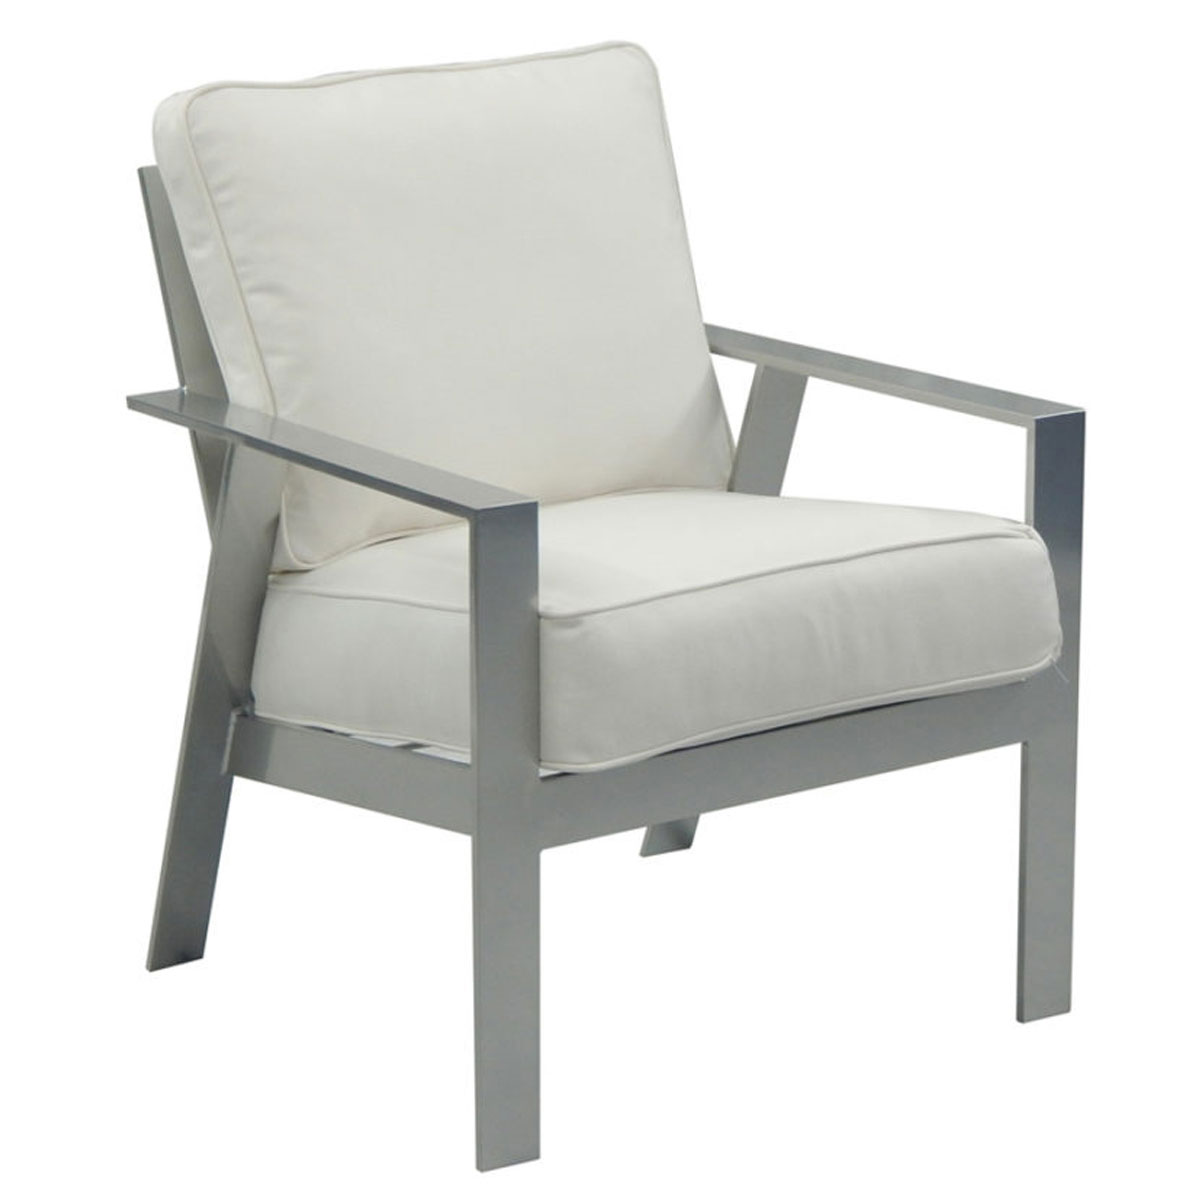 Castelle Trento Cushioned Dining Chair